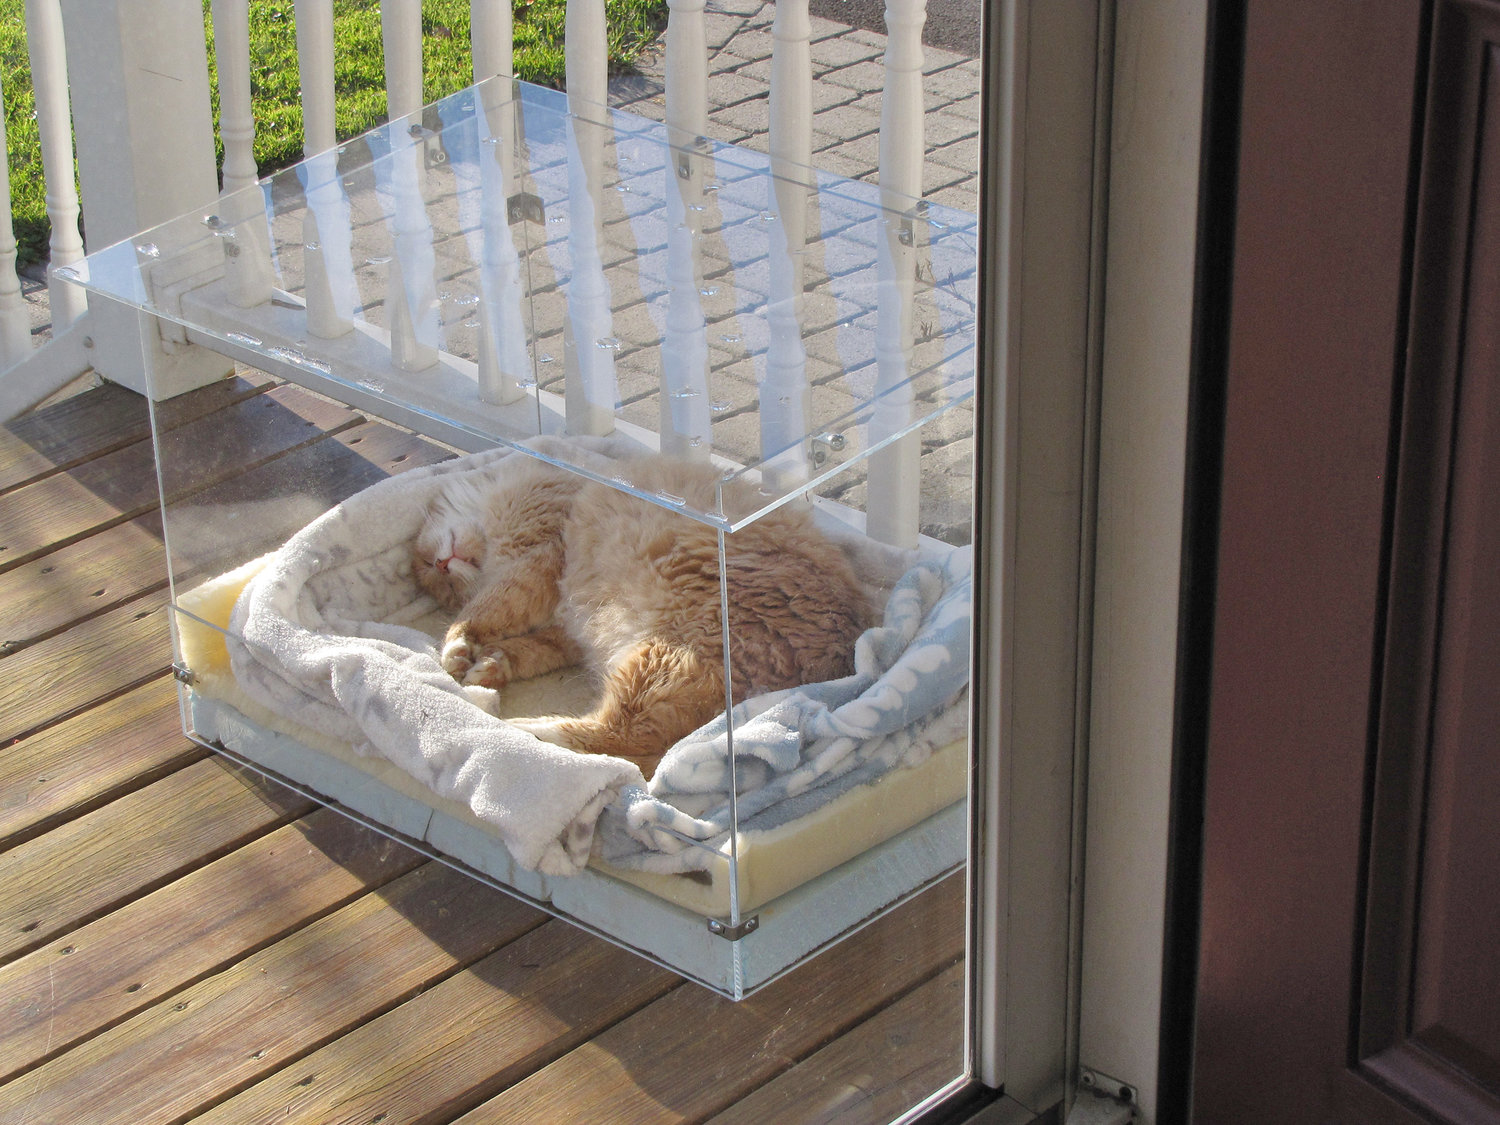 SAFE AND WARM — Cat lover Larry Ehlinger, of Laurel Street, built this Plexiglas enclosure, or “house,” so that his outdoor cat could stay warm and sheltered during the winter.  But the house has attracted some other visitors as well.  Here pet Buffy is resting comfortably. (Photos submitted)